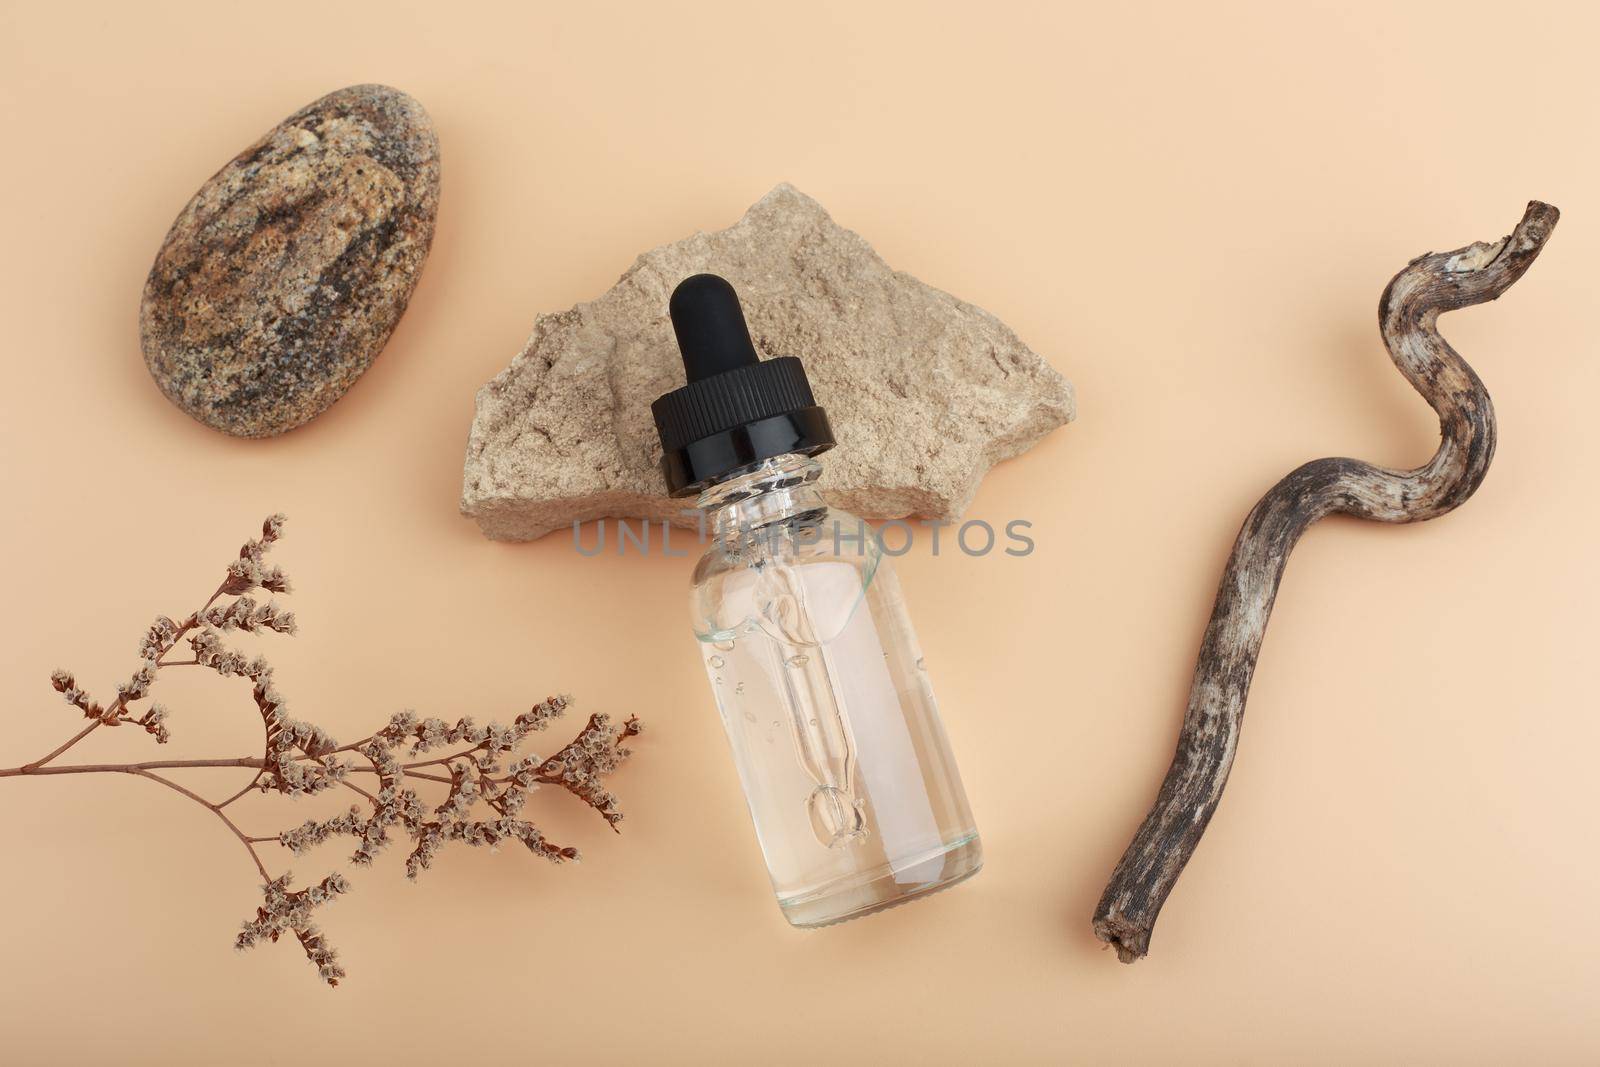 Top view of skin serum in transparent bottle with black cap on beige table with dry flower, stones and stick near. Concept of natural organic cosmetics and spa or anti aging treatment